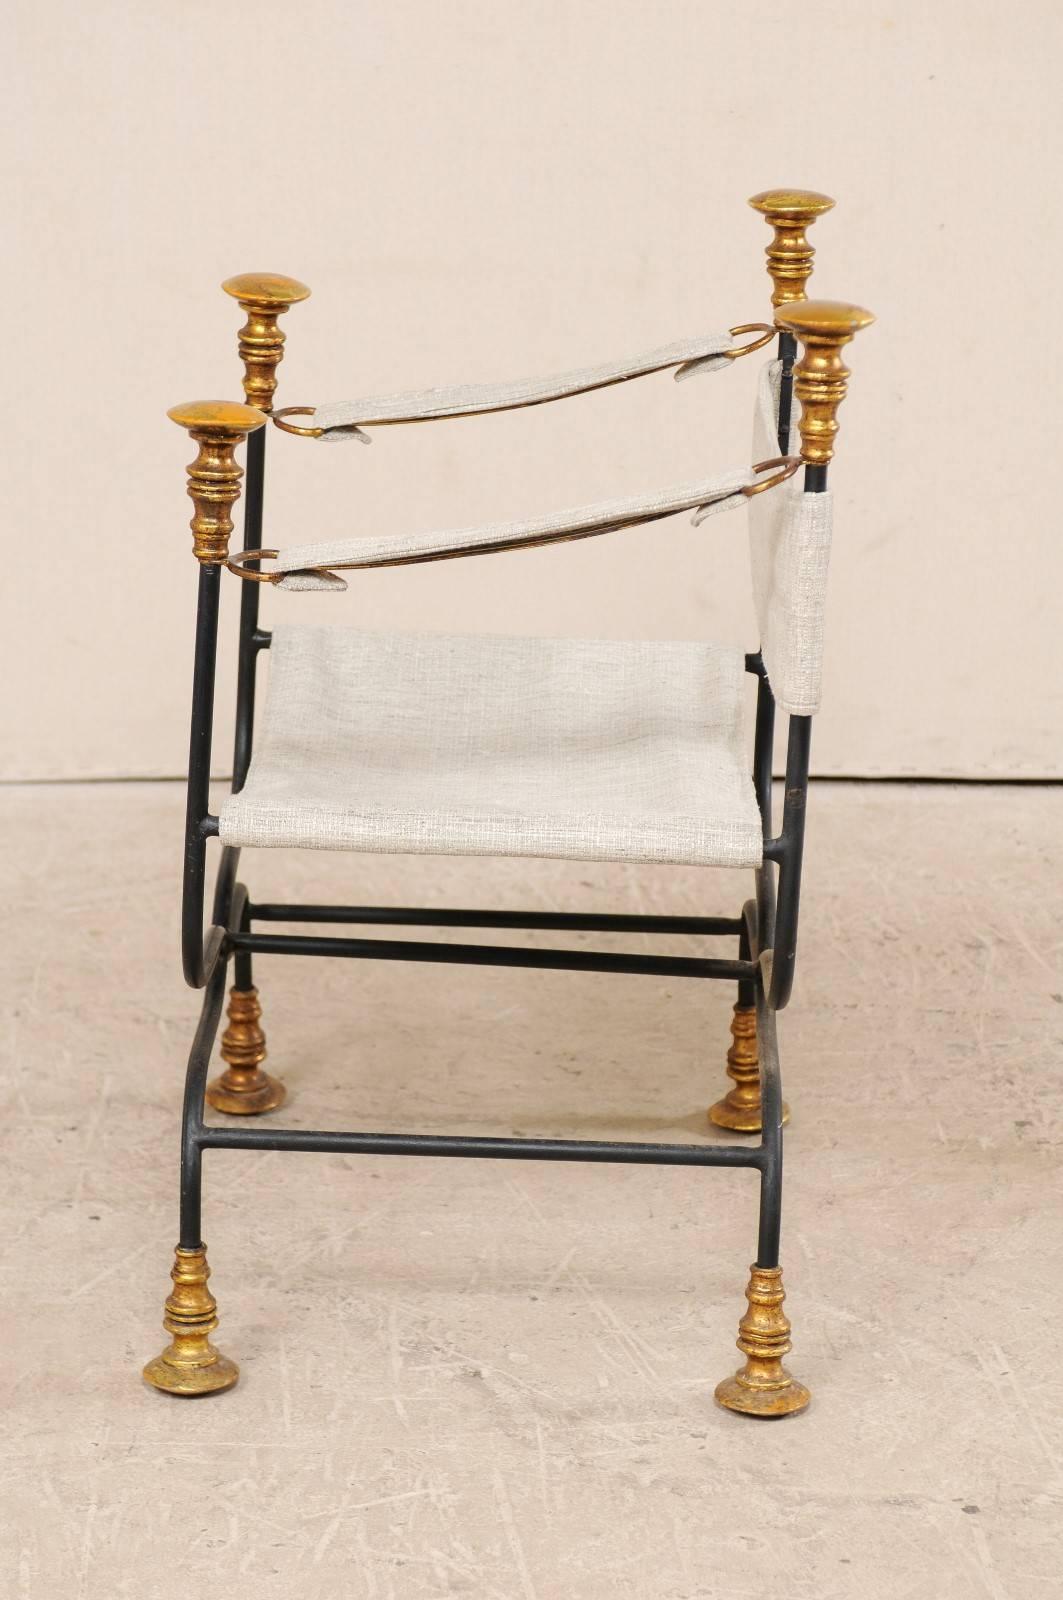 Metal Single Italian Dante 20th Century Chair with Iron, Gold Finials and Upholstery